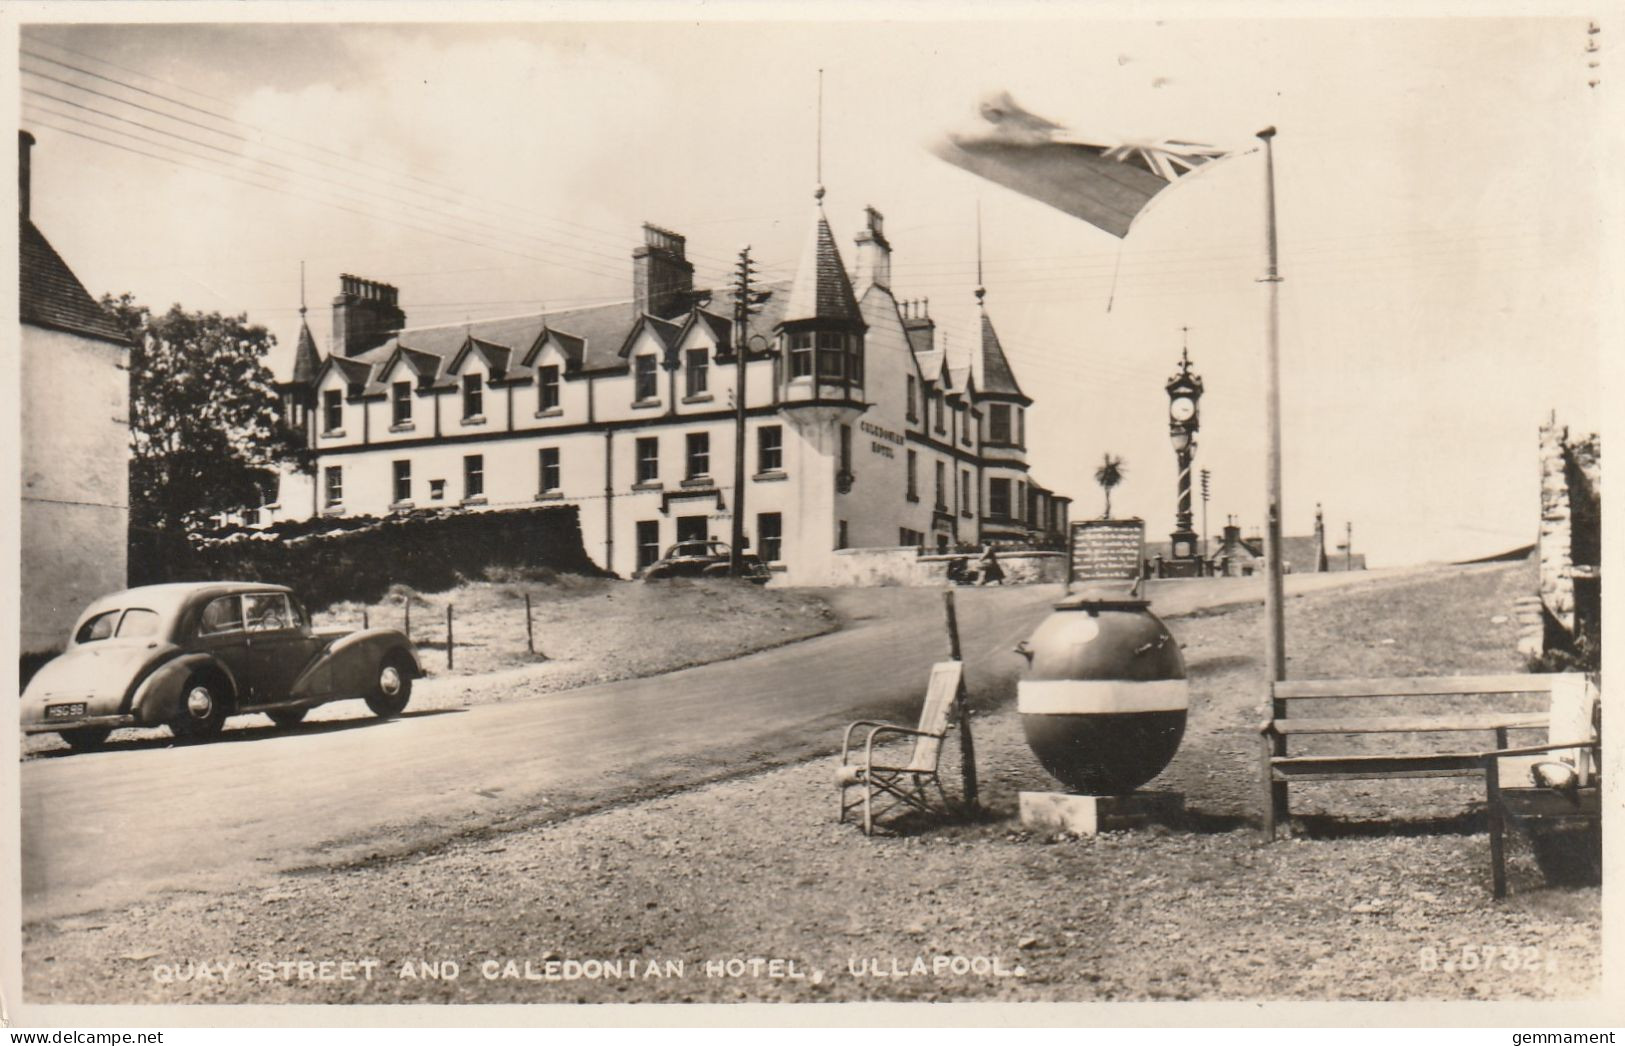 ULLAPOOL - QUAY STREET AND CALEDONIAN HOTEL - Ross & Cromarty